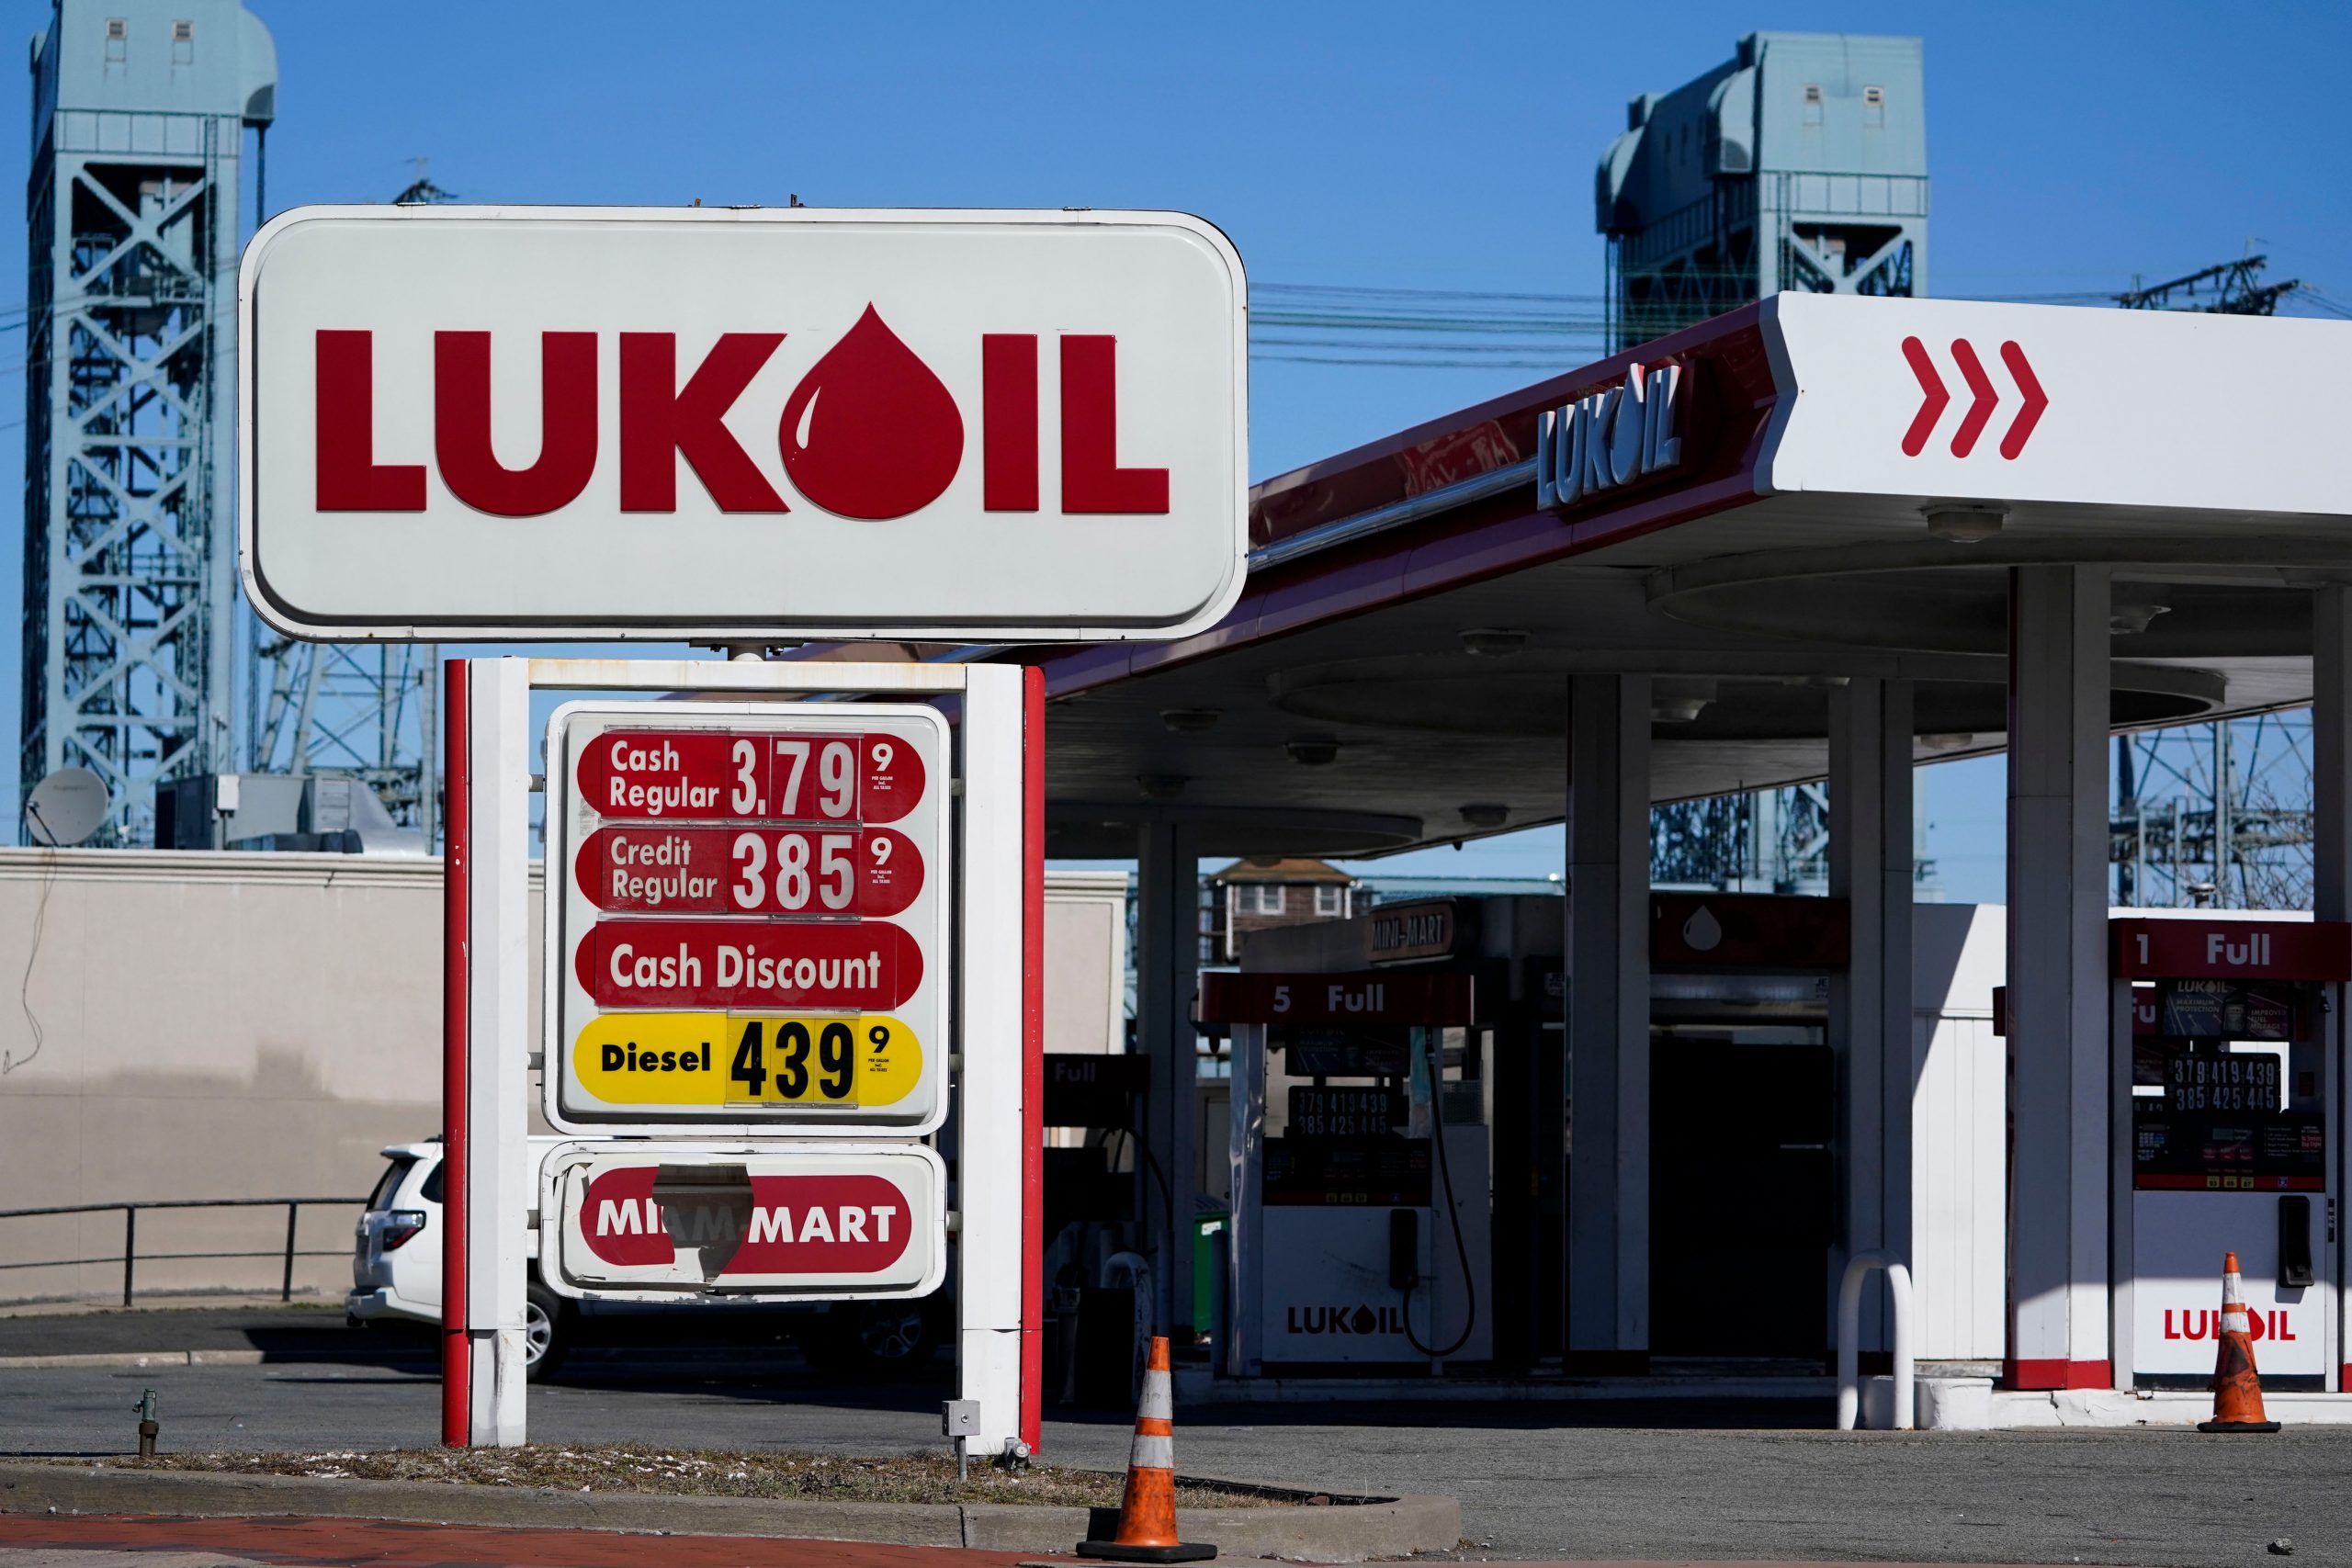 Moscow based gas stations in US face backlash for Russia-Ukraine war